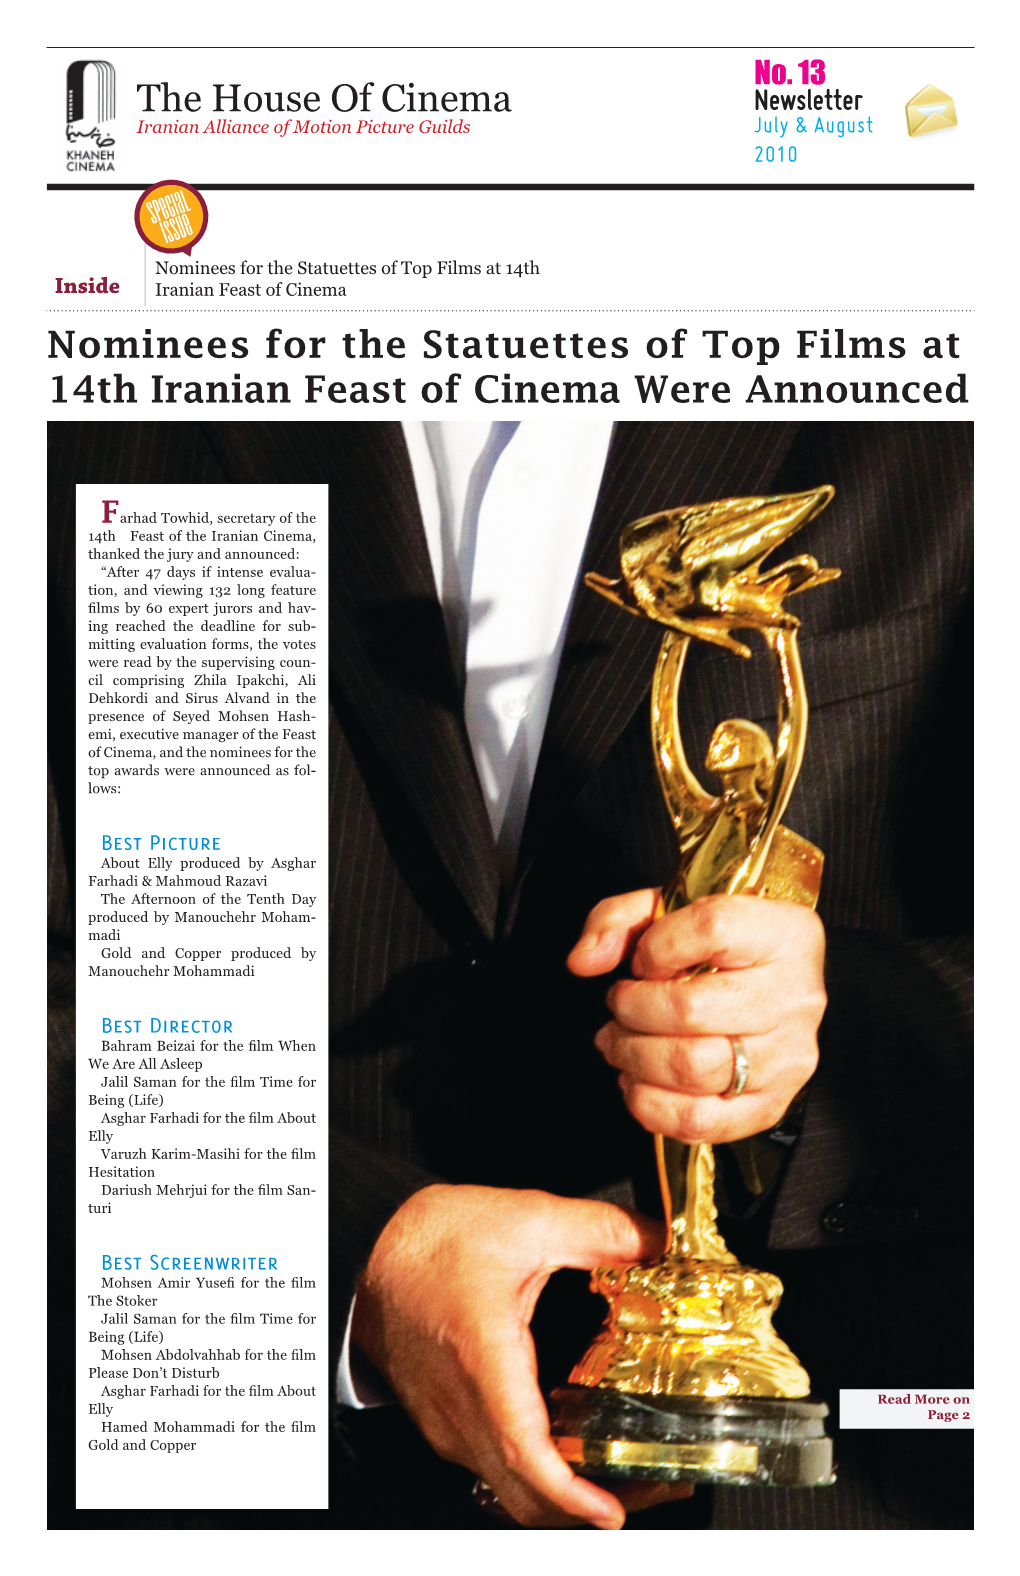 The House of Cinema Newsletter Iranian Alliance of Motion Picture Guilds July & August 2010